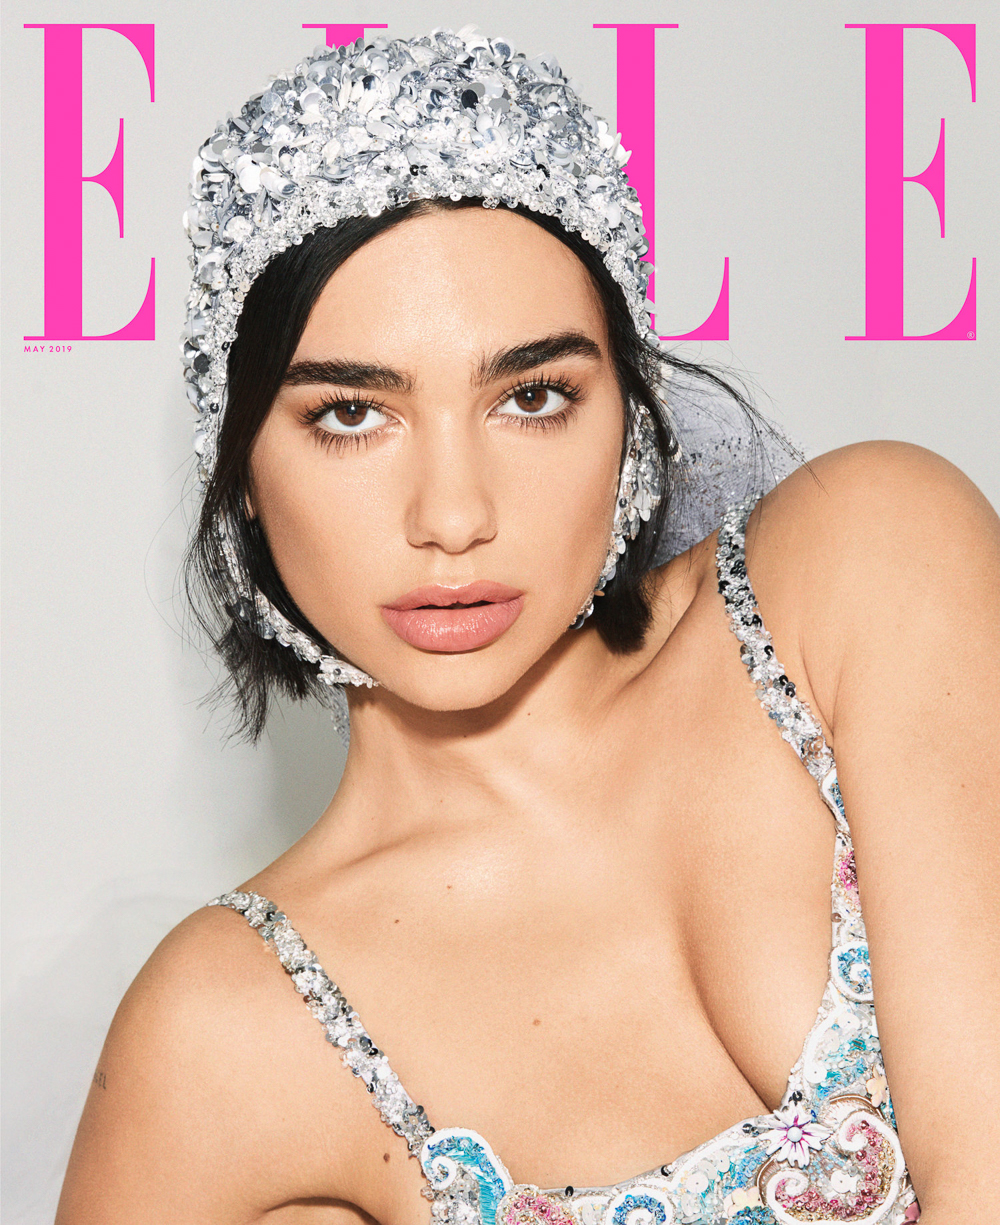 Carin Backoff for ELLE with Dua Lipa